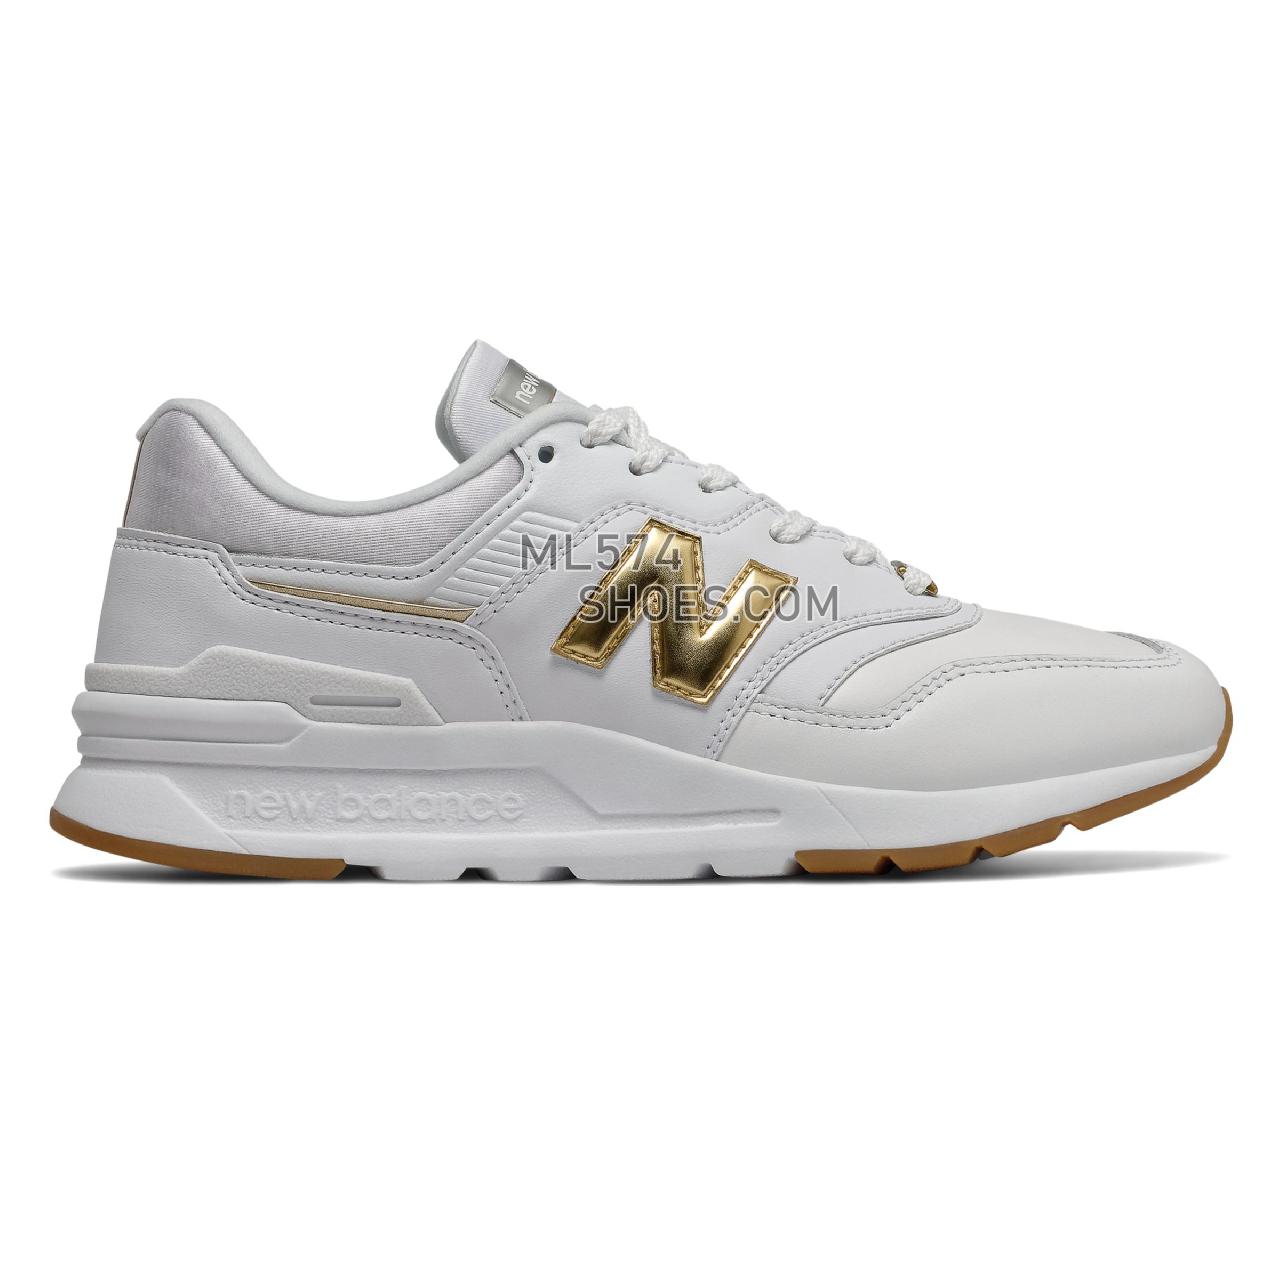 New Balance 997H - Women's Classic Sneakers - White with Gold - CW997HAH